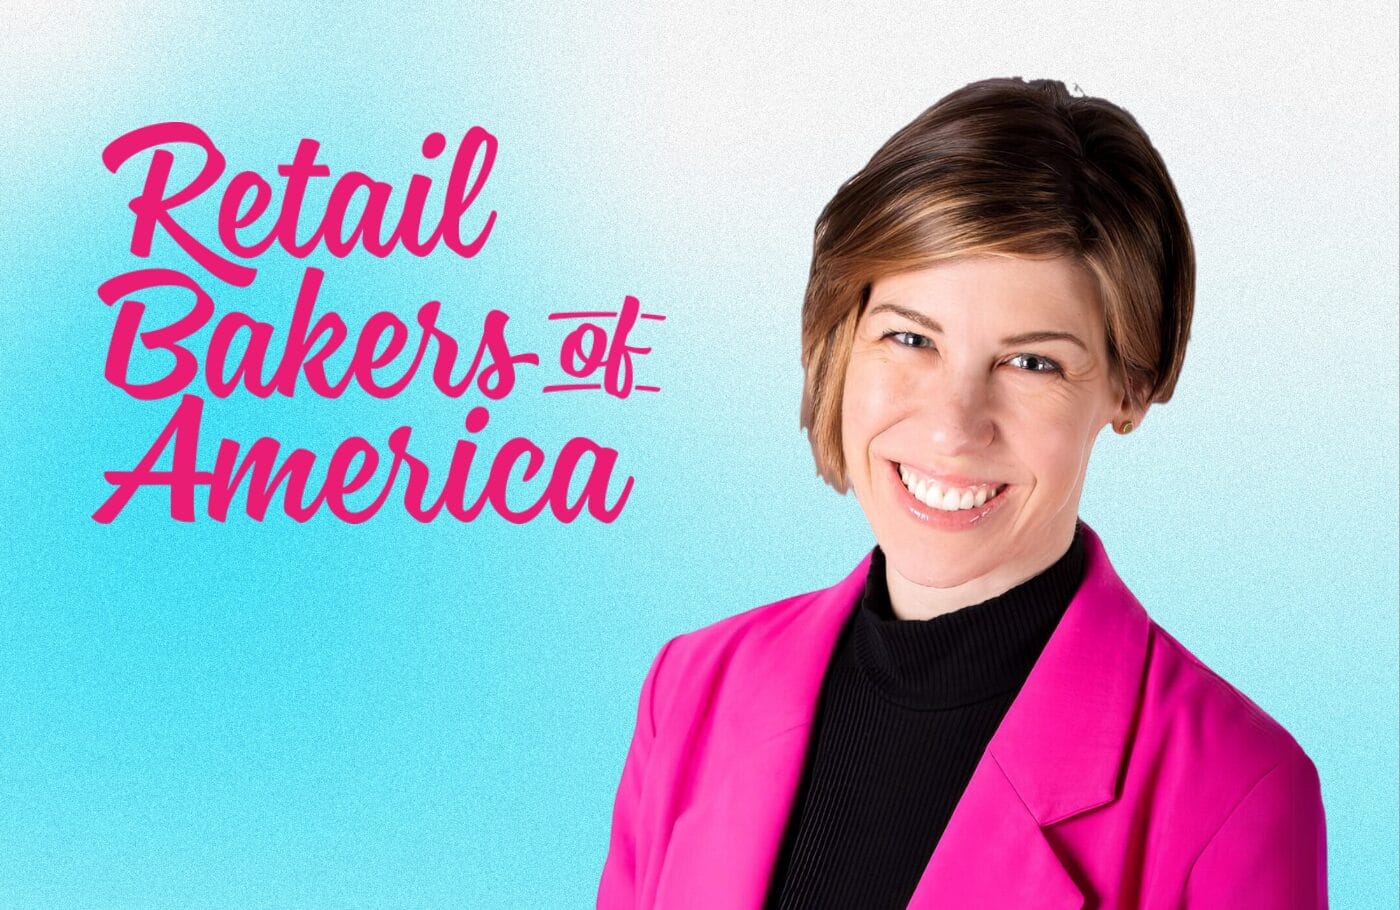 Graphic showing Marissa Velie headshot and Retail Bakers of America logo